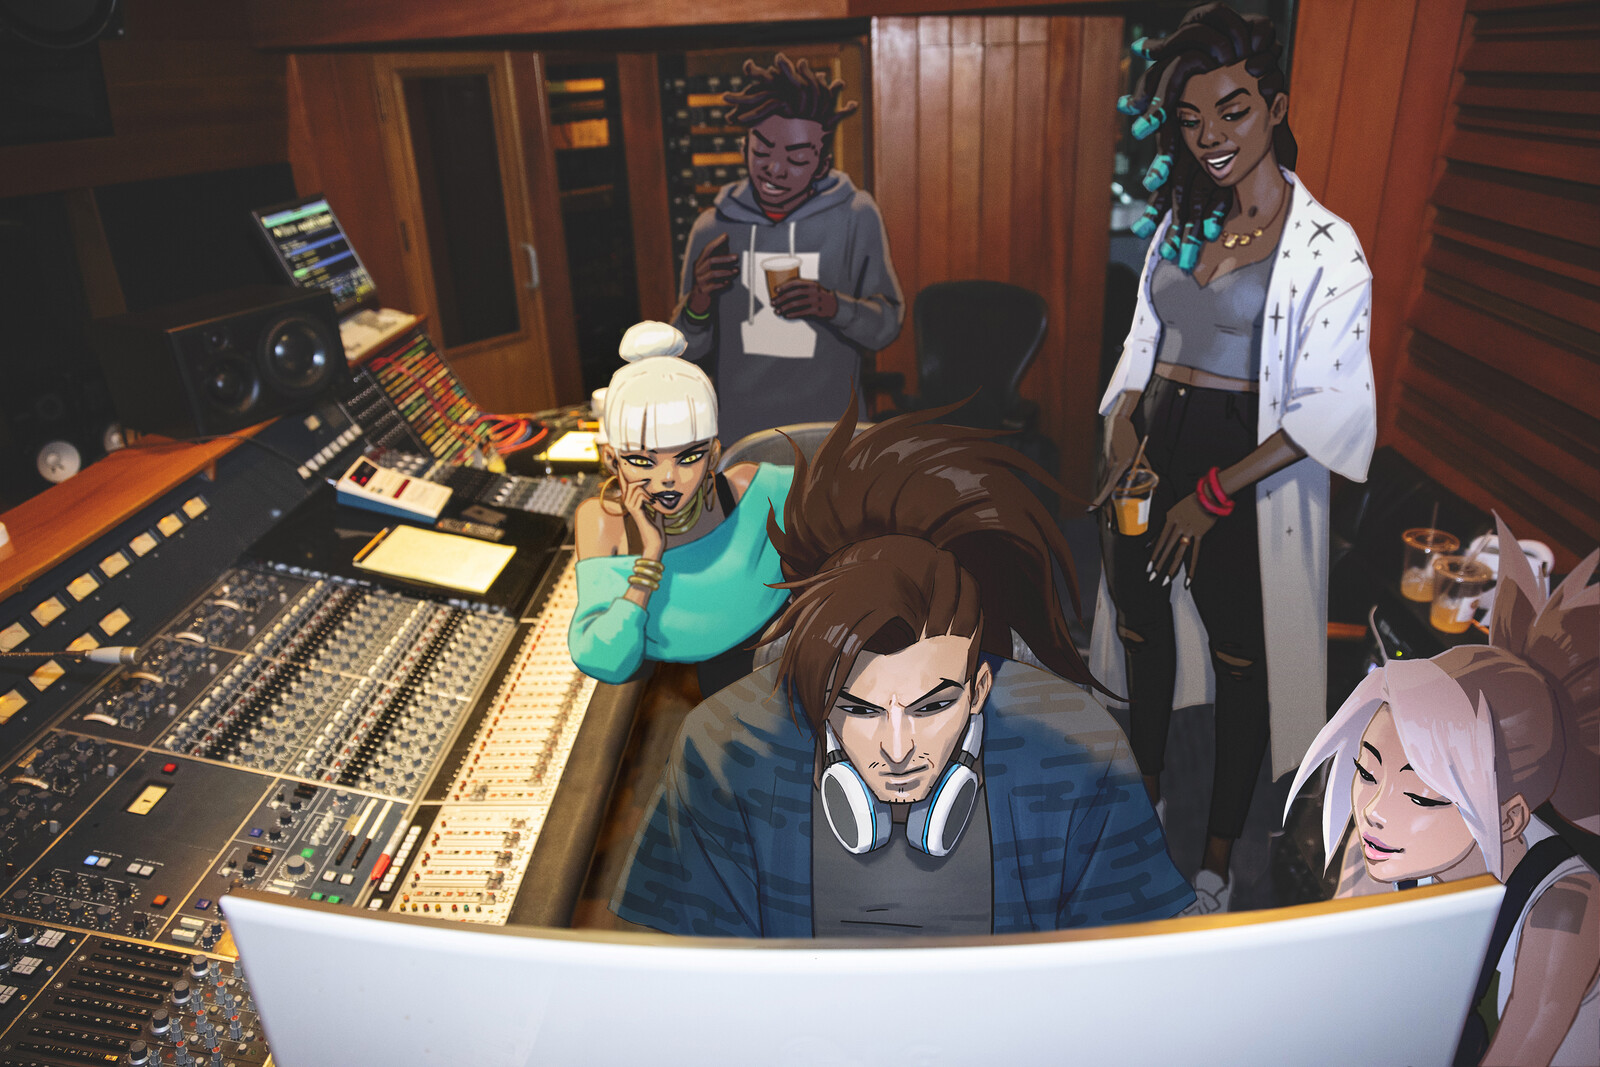 True Damage Instagram.  Akali assembles the collective: Making magic.  Producer Yasuo putting the track together.  (The studio featured in this image is the actual studio where the most of the vocals were recorded).